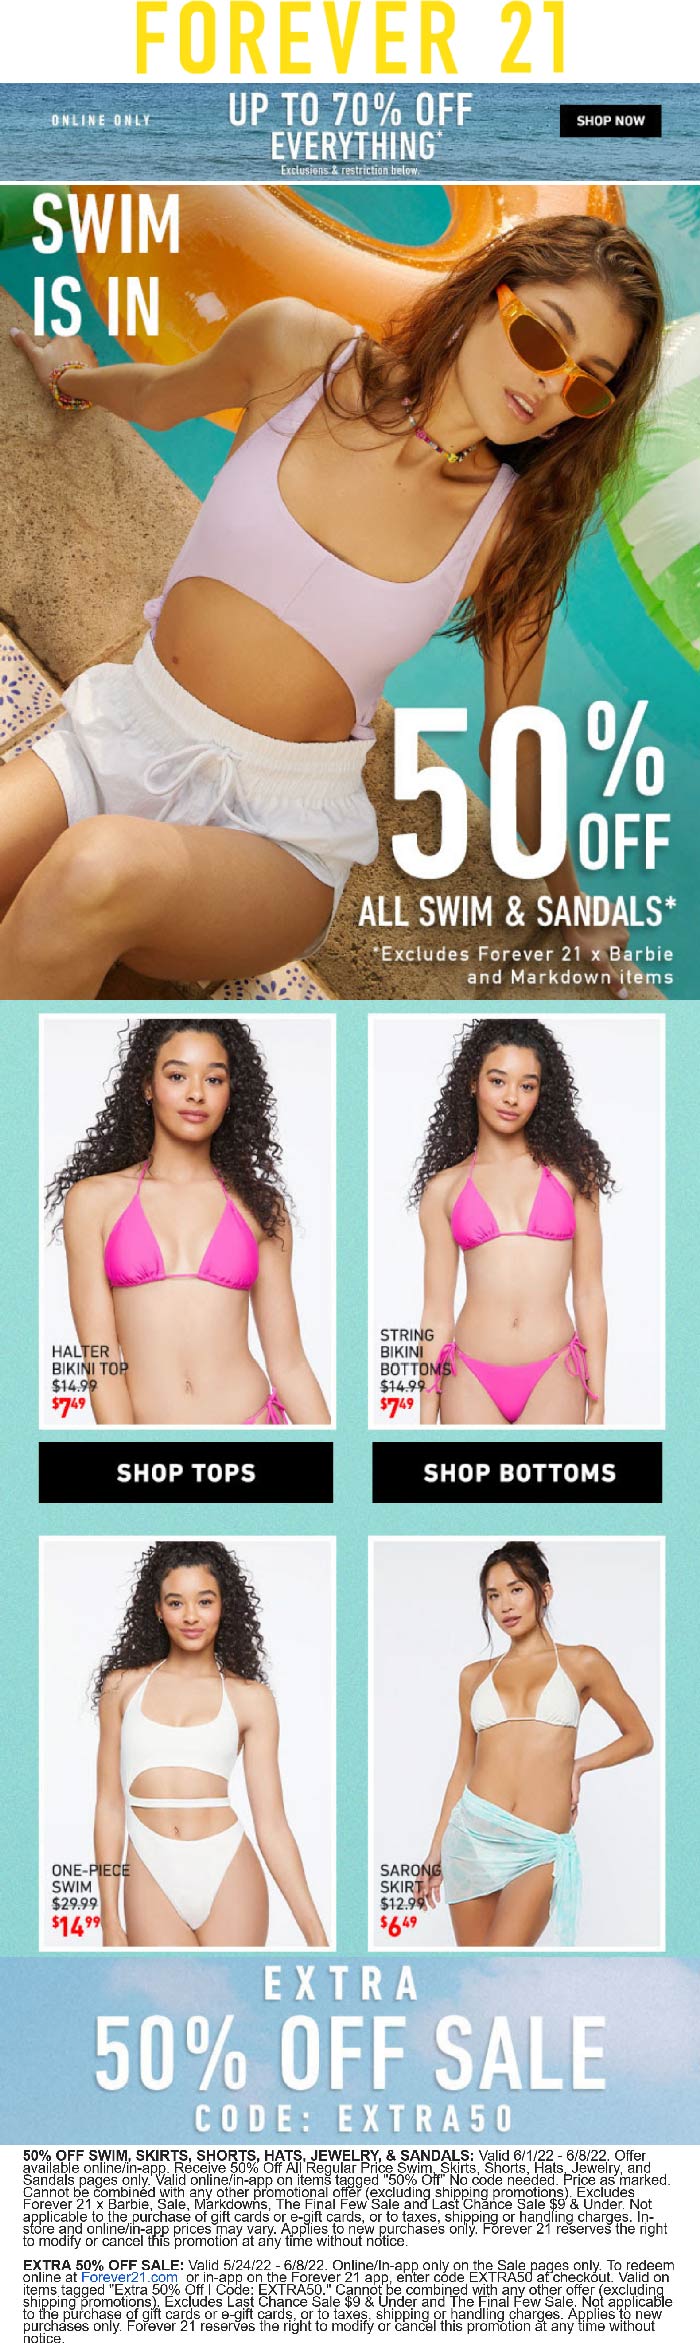 Forever 21 stores Coupon  50% off swim & more online at Forever 21 via promo code EXTRA50 #forever21 